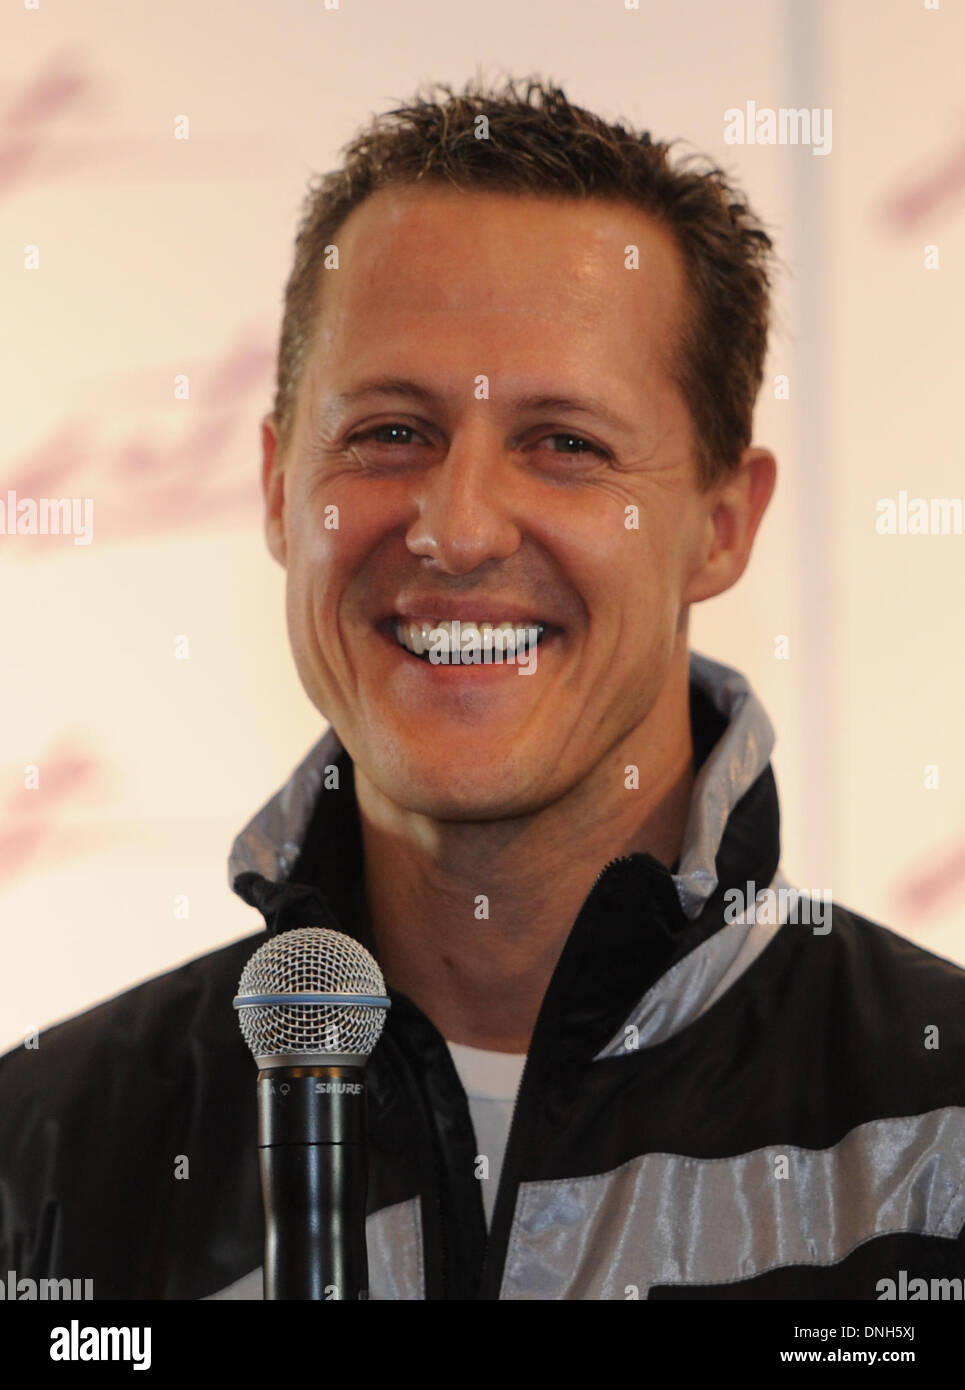 FILE: Formula One pilot Michael Schumacher visits the sporting goods trade fair ispo iN Munich, Germany, 06 February 2011. 2267 exhibitors from 49 countries participate in the trade show that runs until 09 February. Photo: Marc Muellerdpa/Alamy Live News Stock Photo